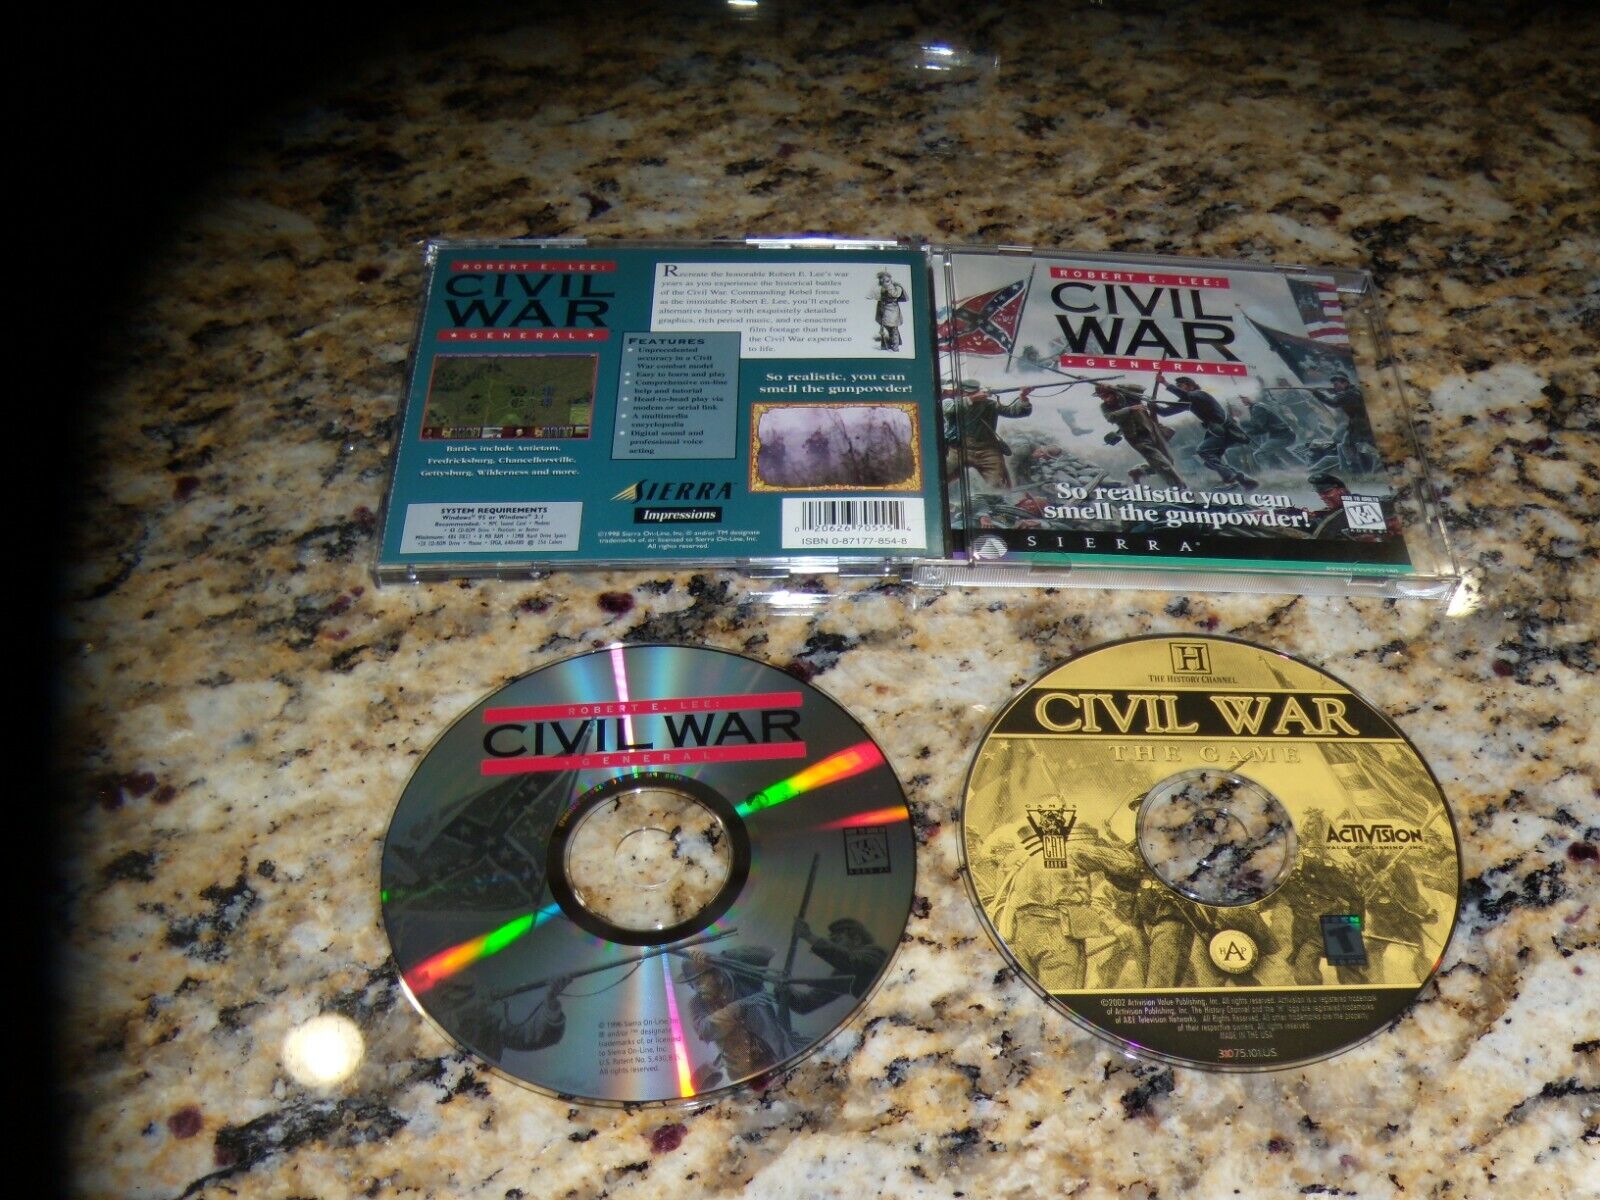 Robert E. Lee Civil War General & The History Channel Civil War the Game - PC